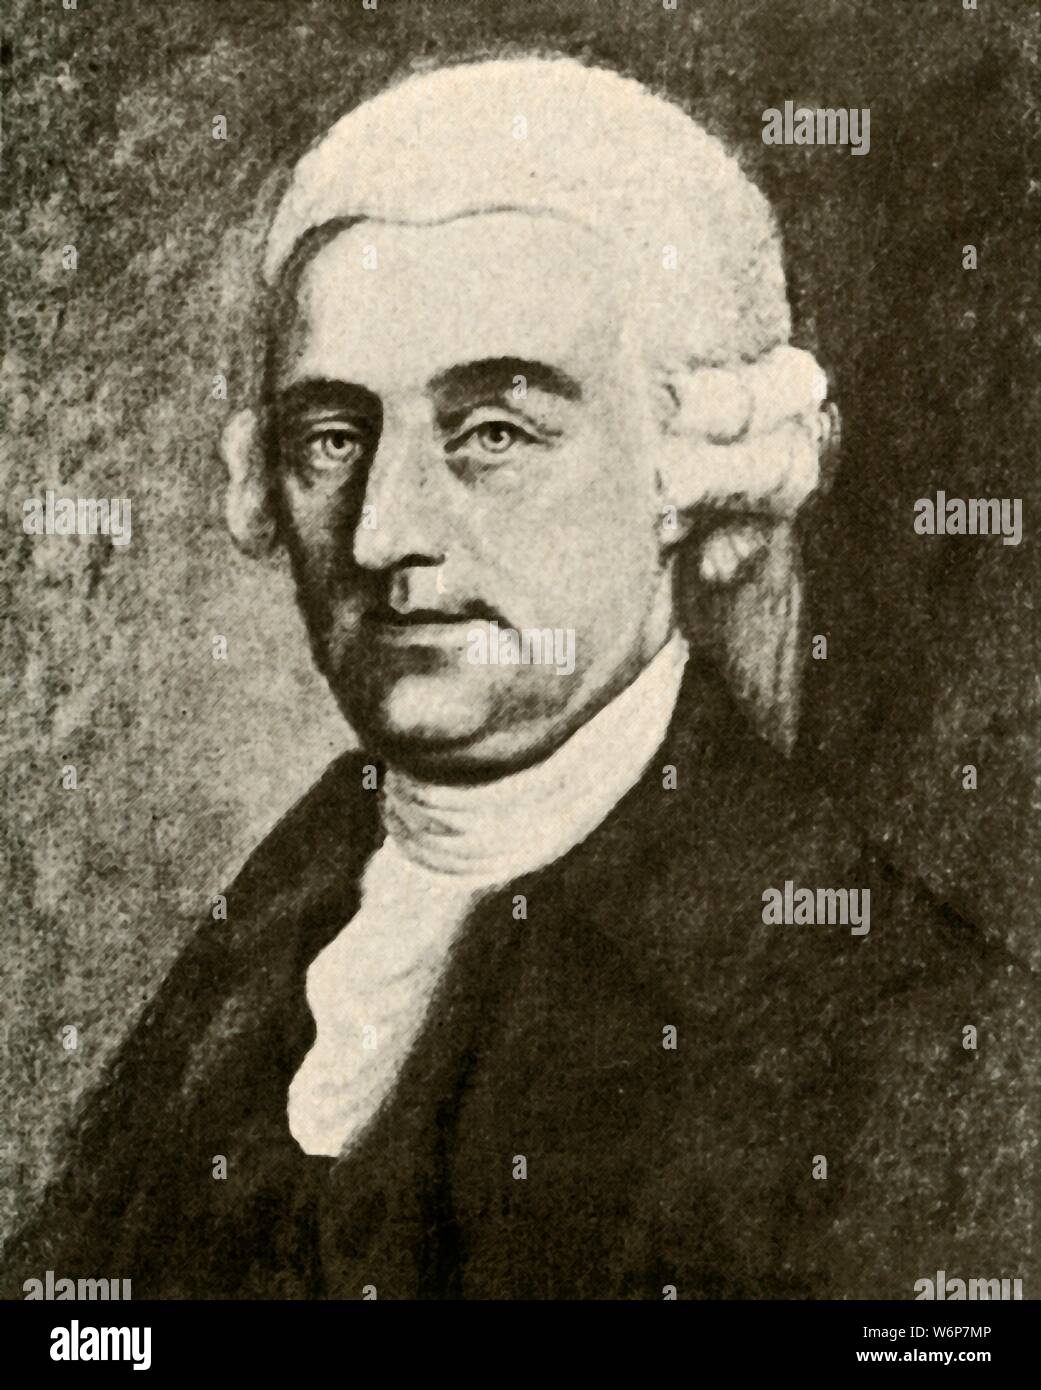 'Portrait of Nathaniel Appleton of Boston, showing white wig with puffs at side', c1740, (1937). Nathaniel Appleton (1693-1784)  Congregational minister in Massachusetts colony. From &quot;History of American Costume - Book One 1607-1800&quot;, by Elisabeth McClellan. [Tudor Publishing Company, New York, 1937] Stock Photo